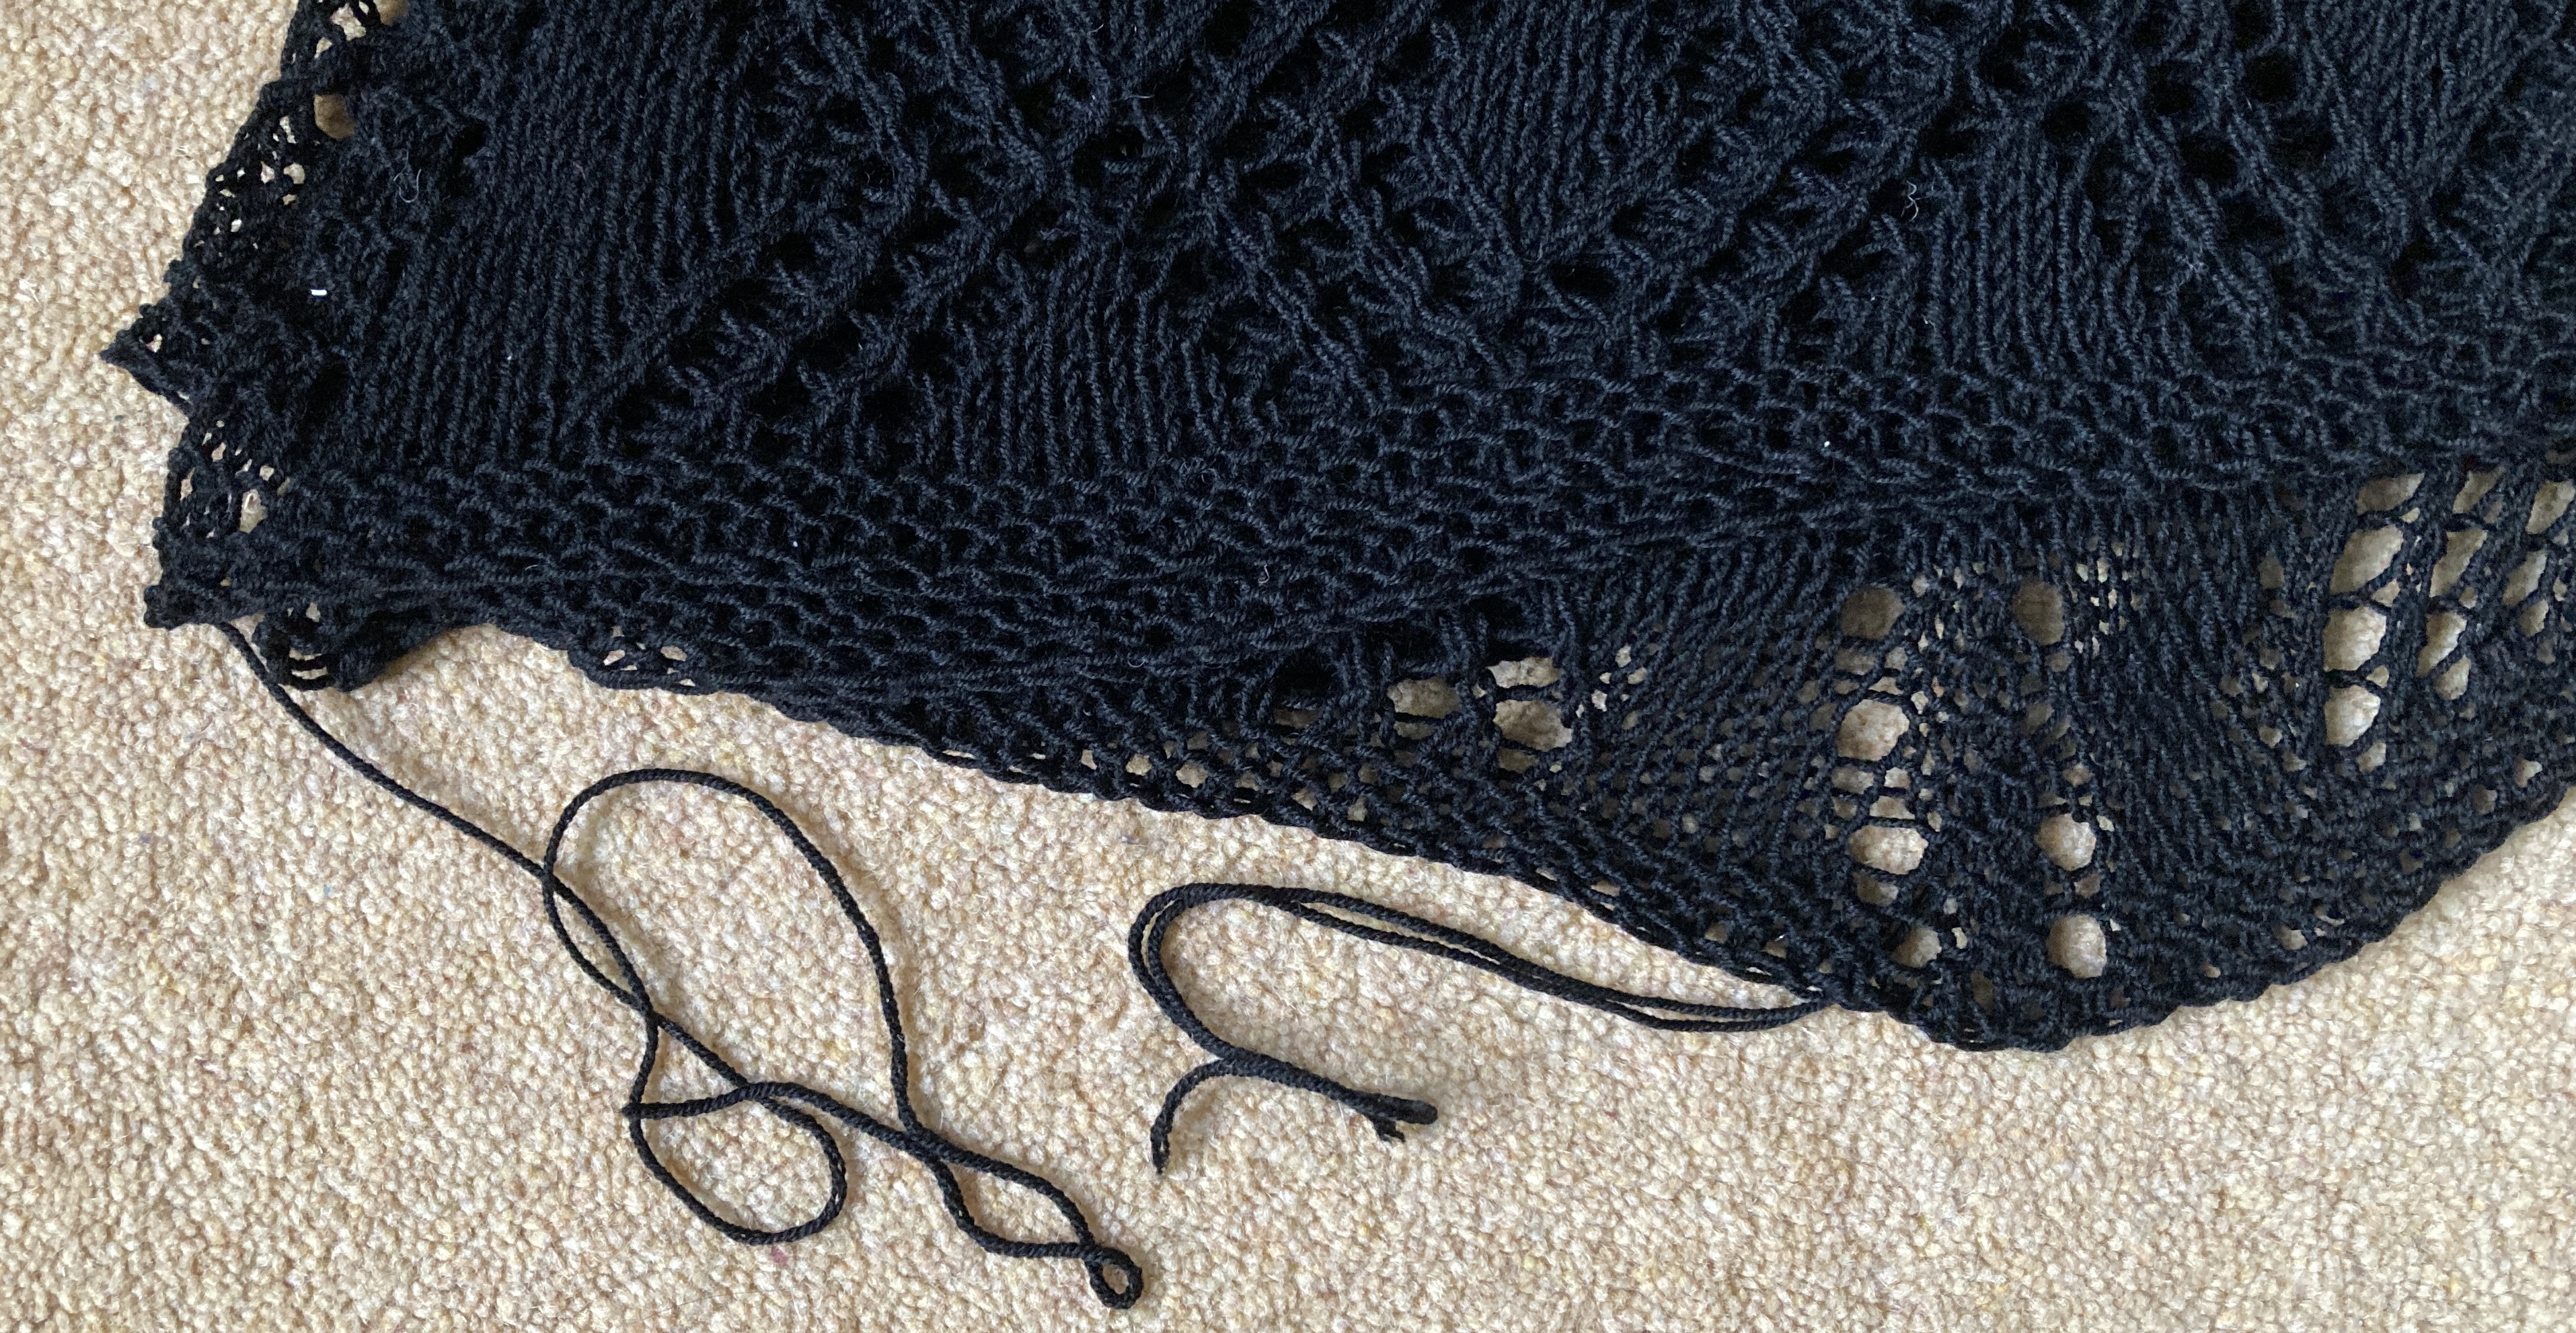 Part of a folded black lace knitted shawl on a pale carpet with yarn ends that need to be woven in